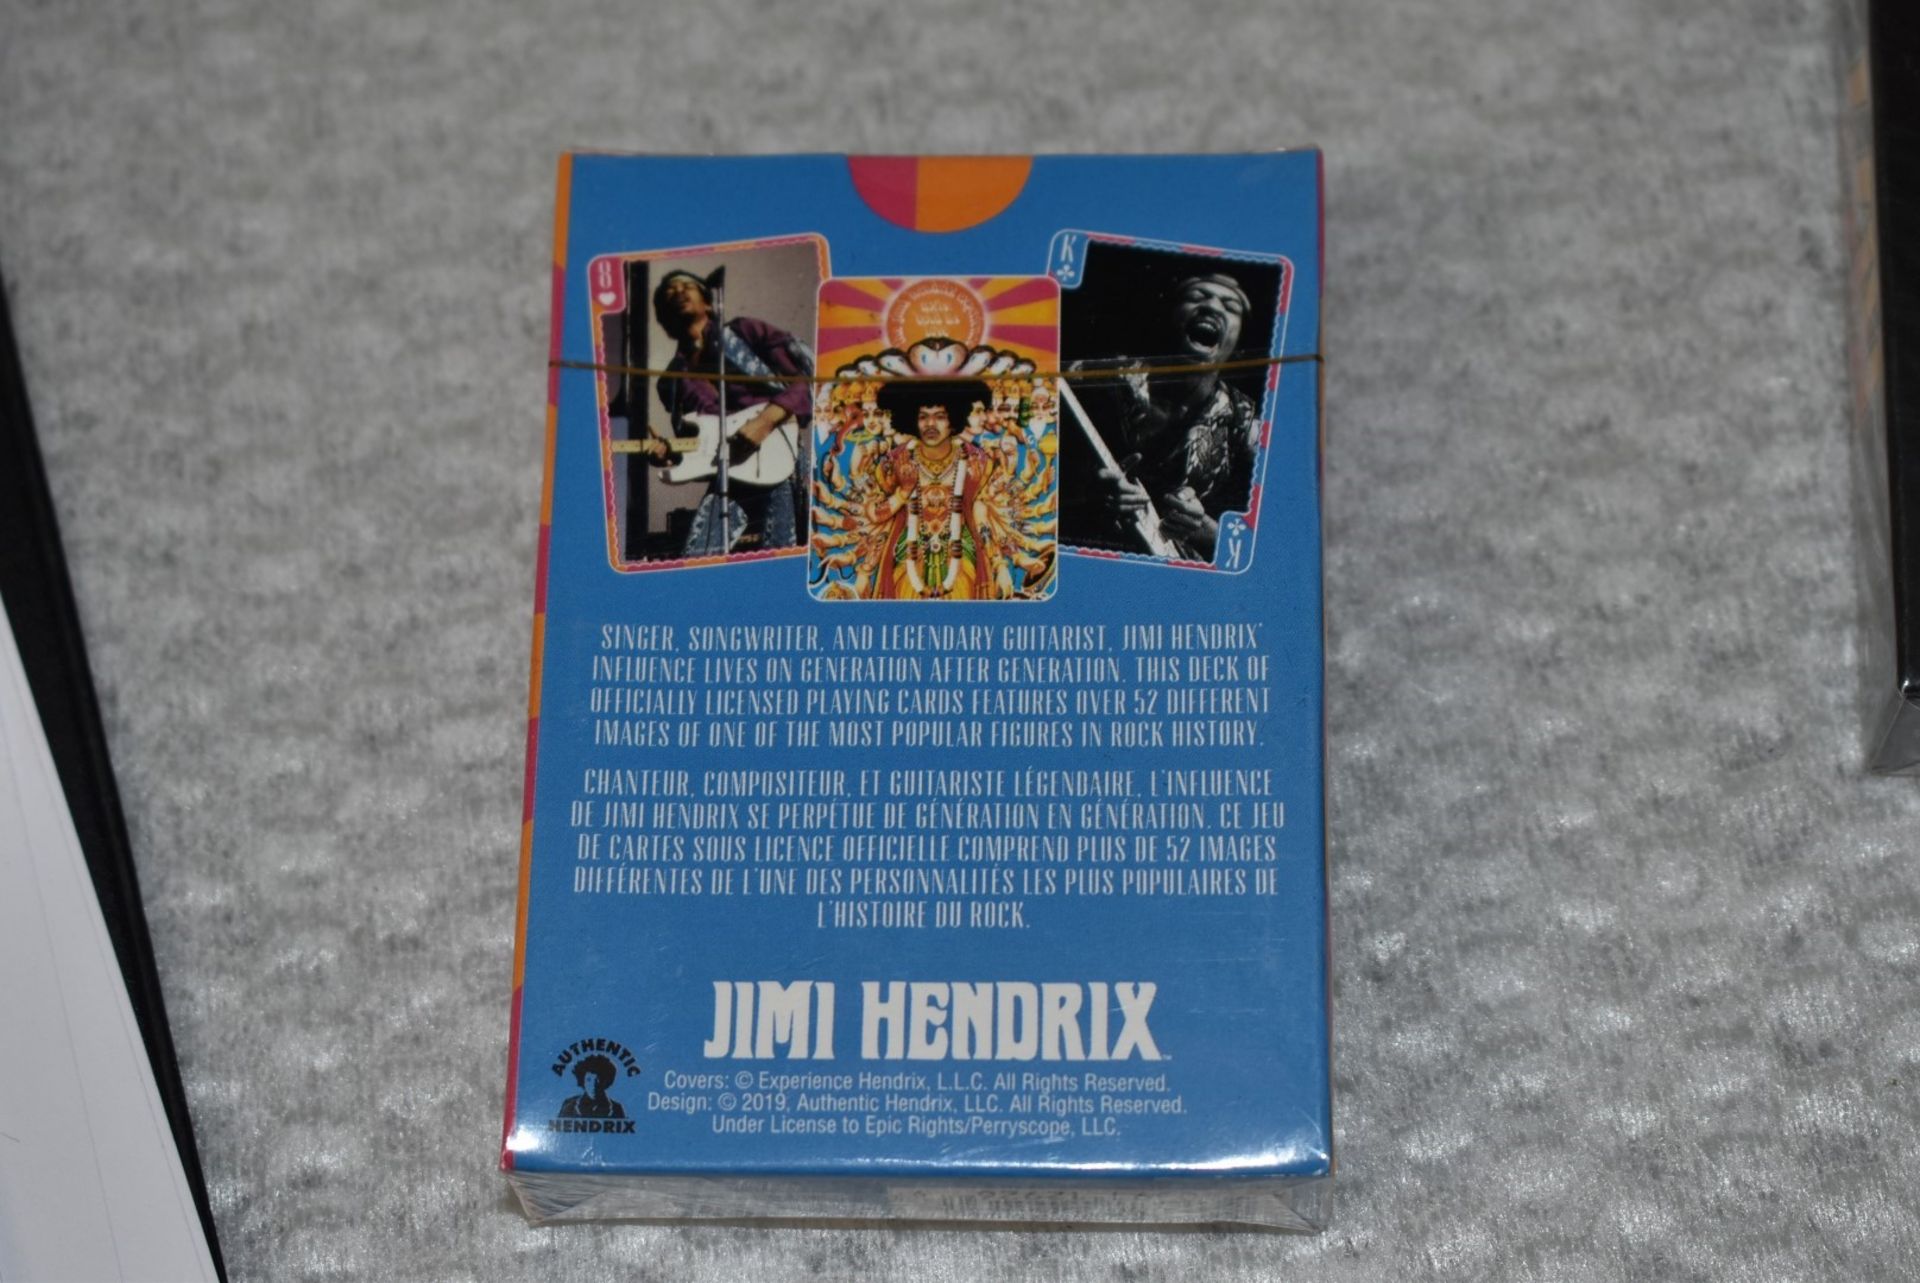 12 x Packs of Themed Playing Cards Featuring Jimi Hendrix, Fender, Labyrinth & Kiss - RRP £120 - Image 7 of 7